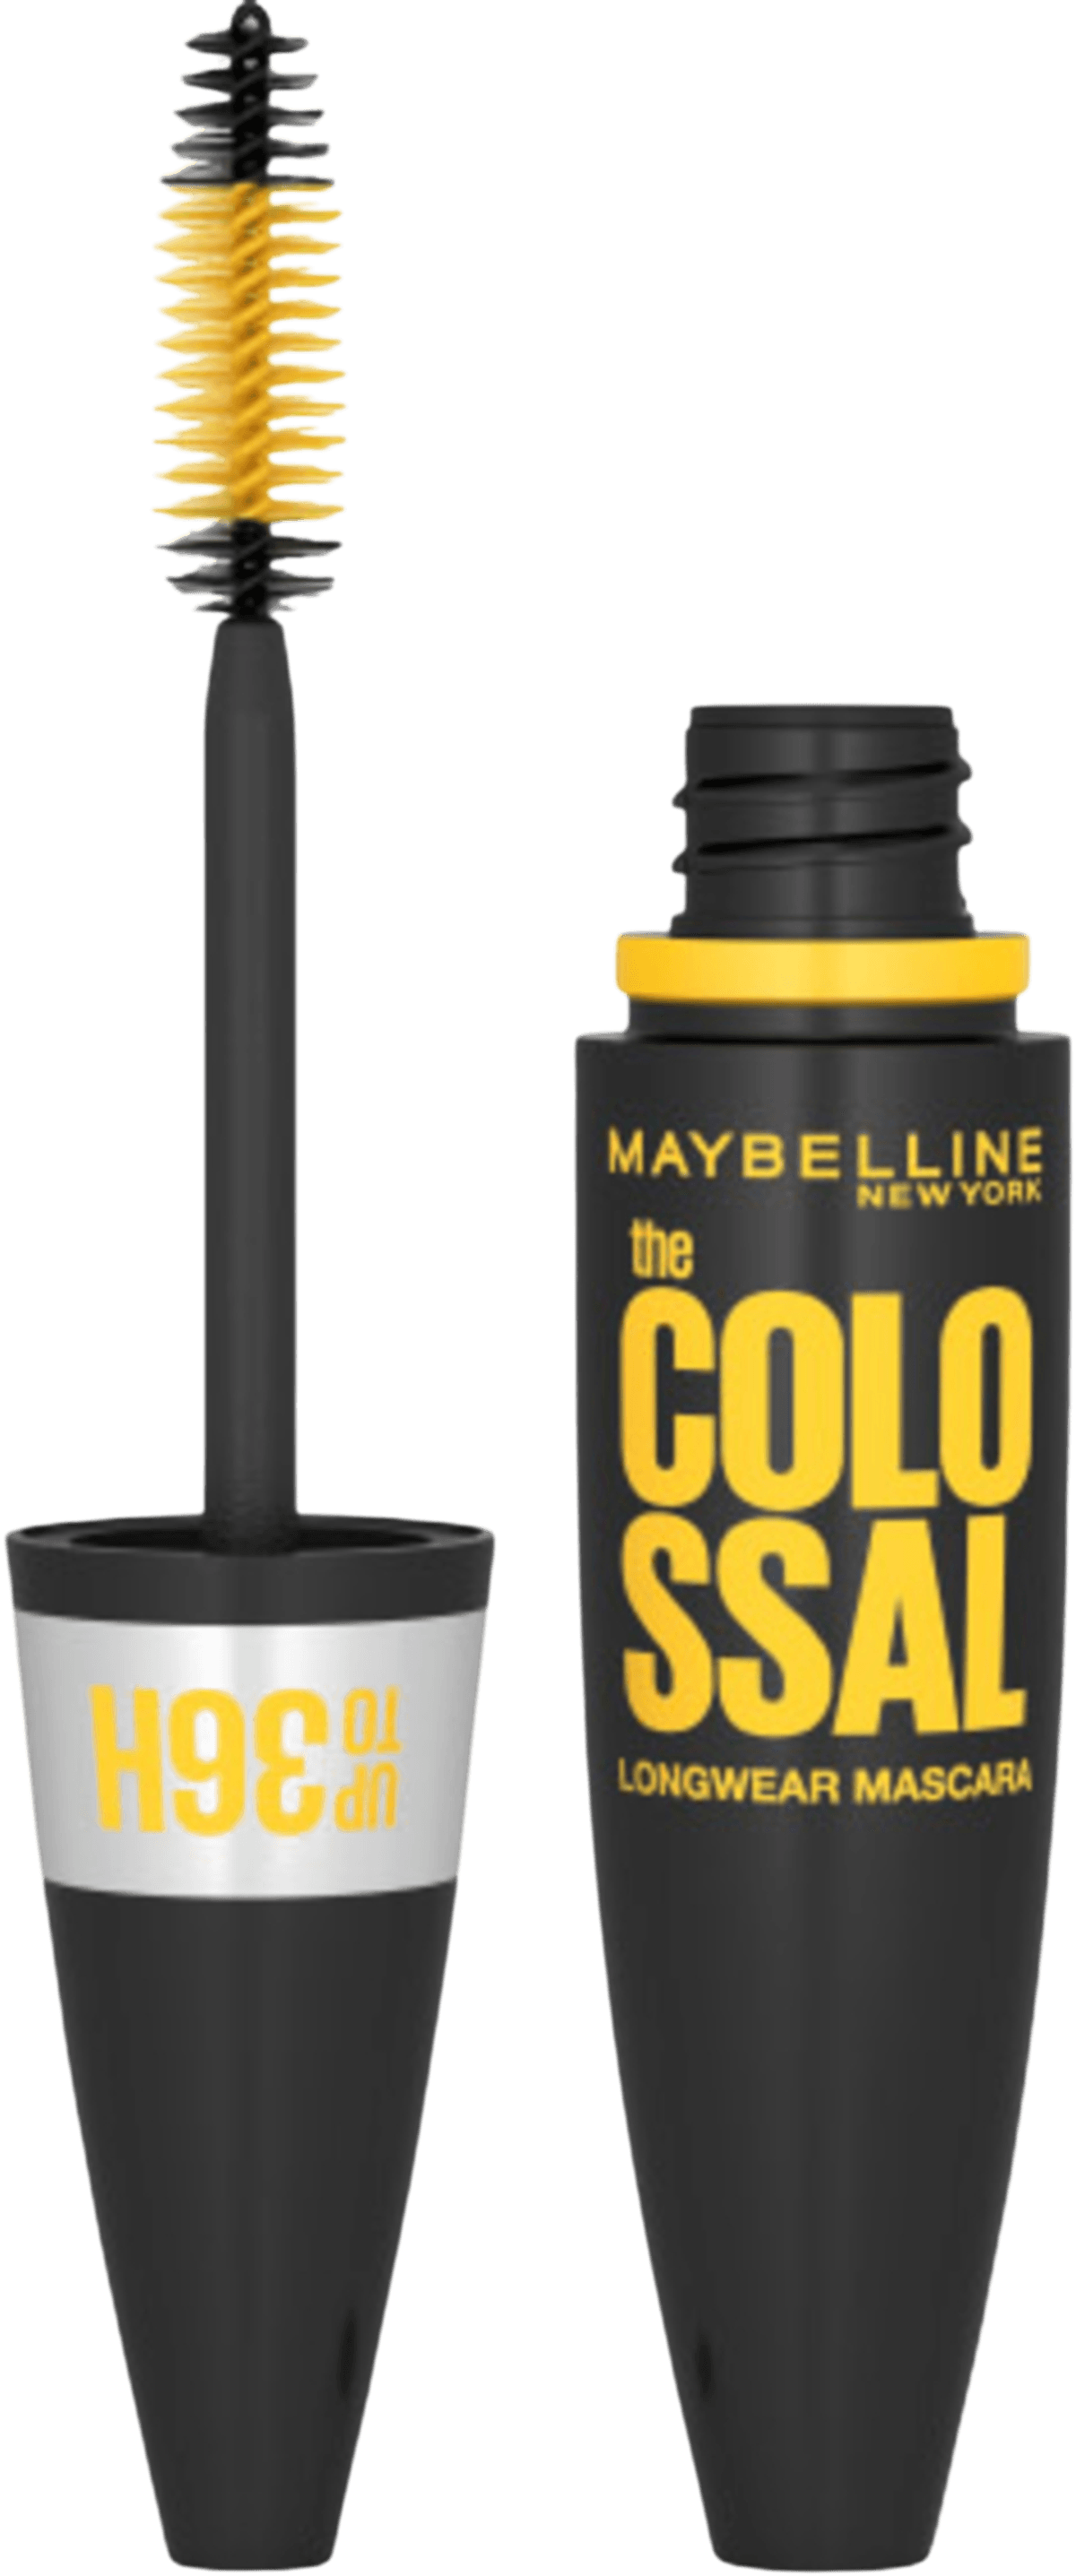 The Colossal Up To 36H Mascara